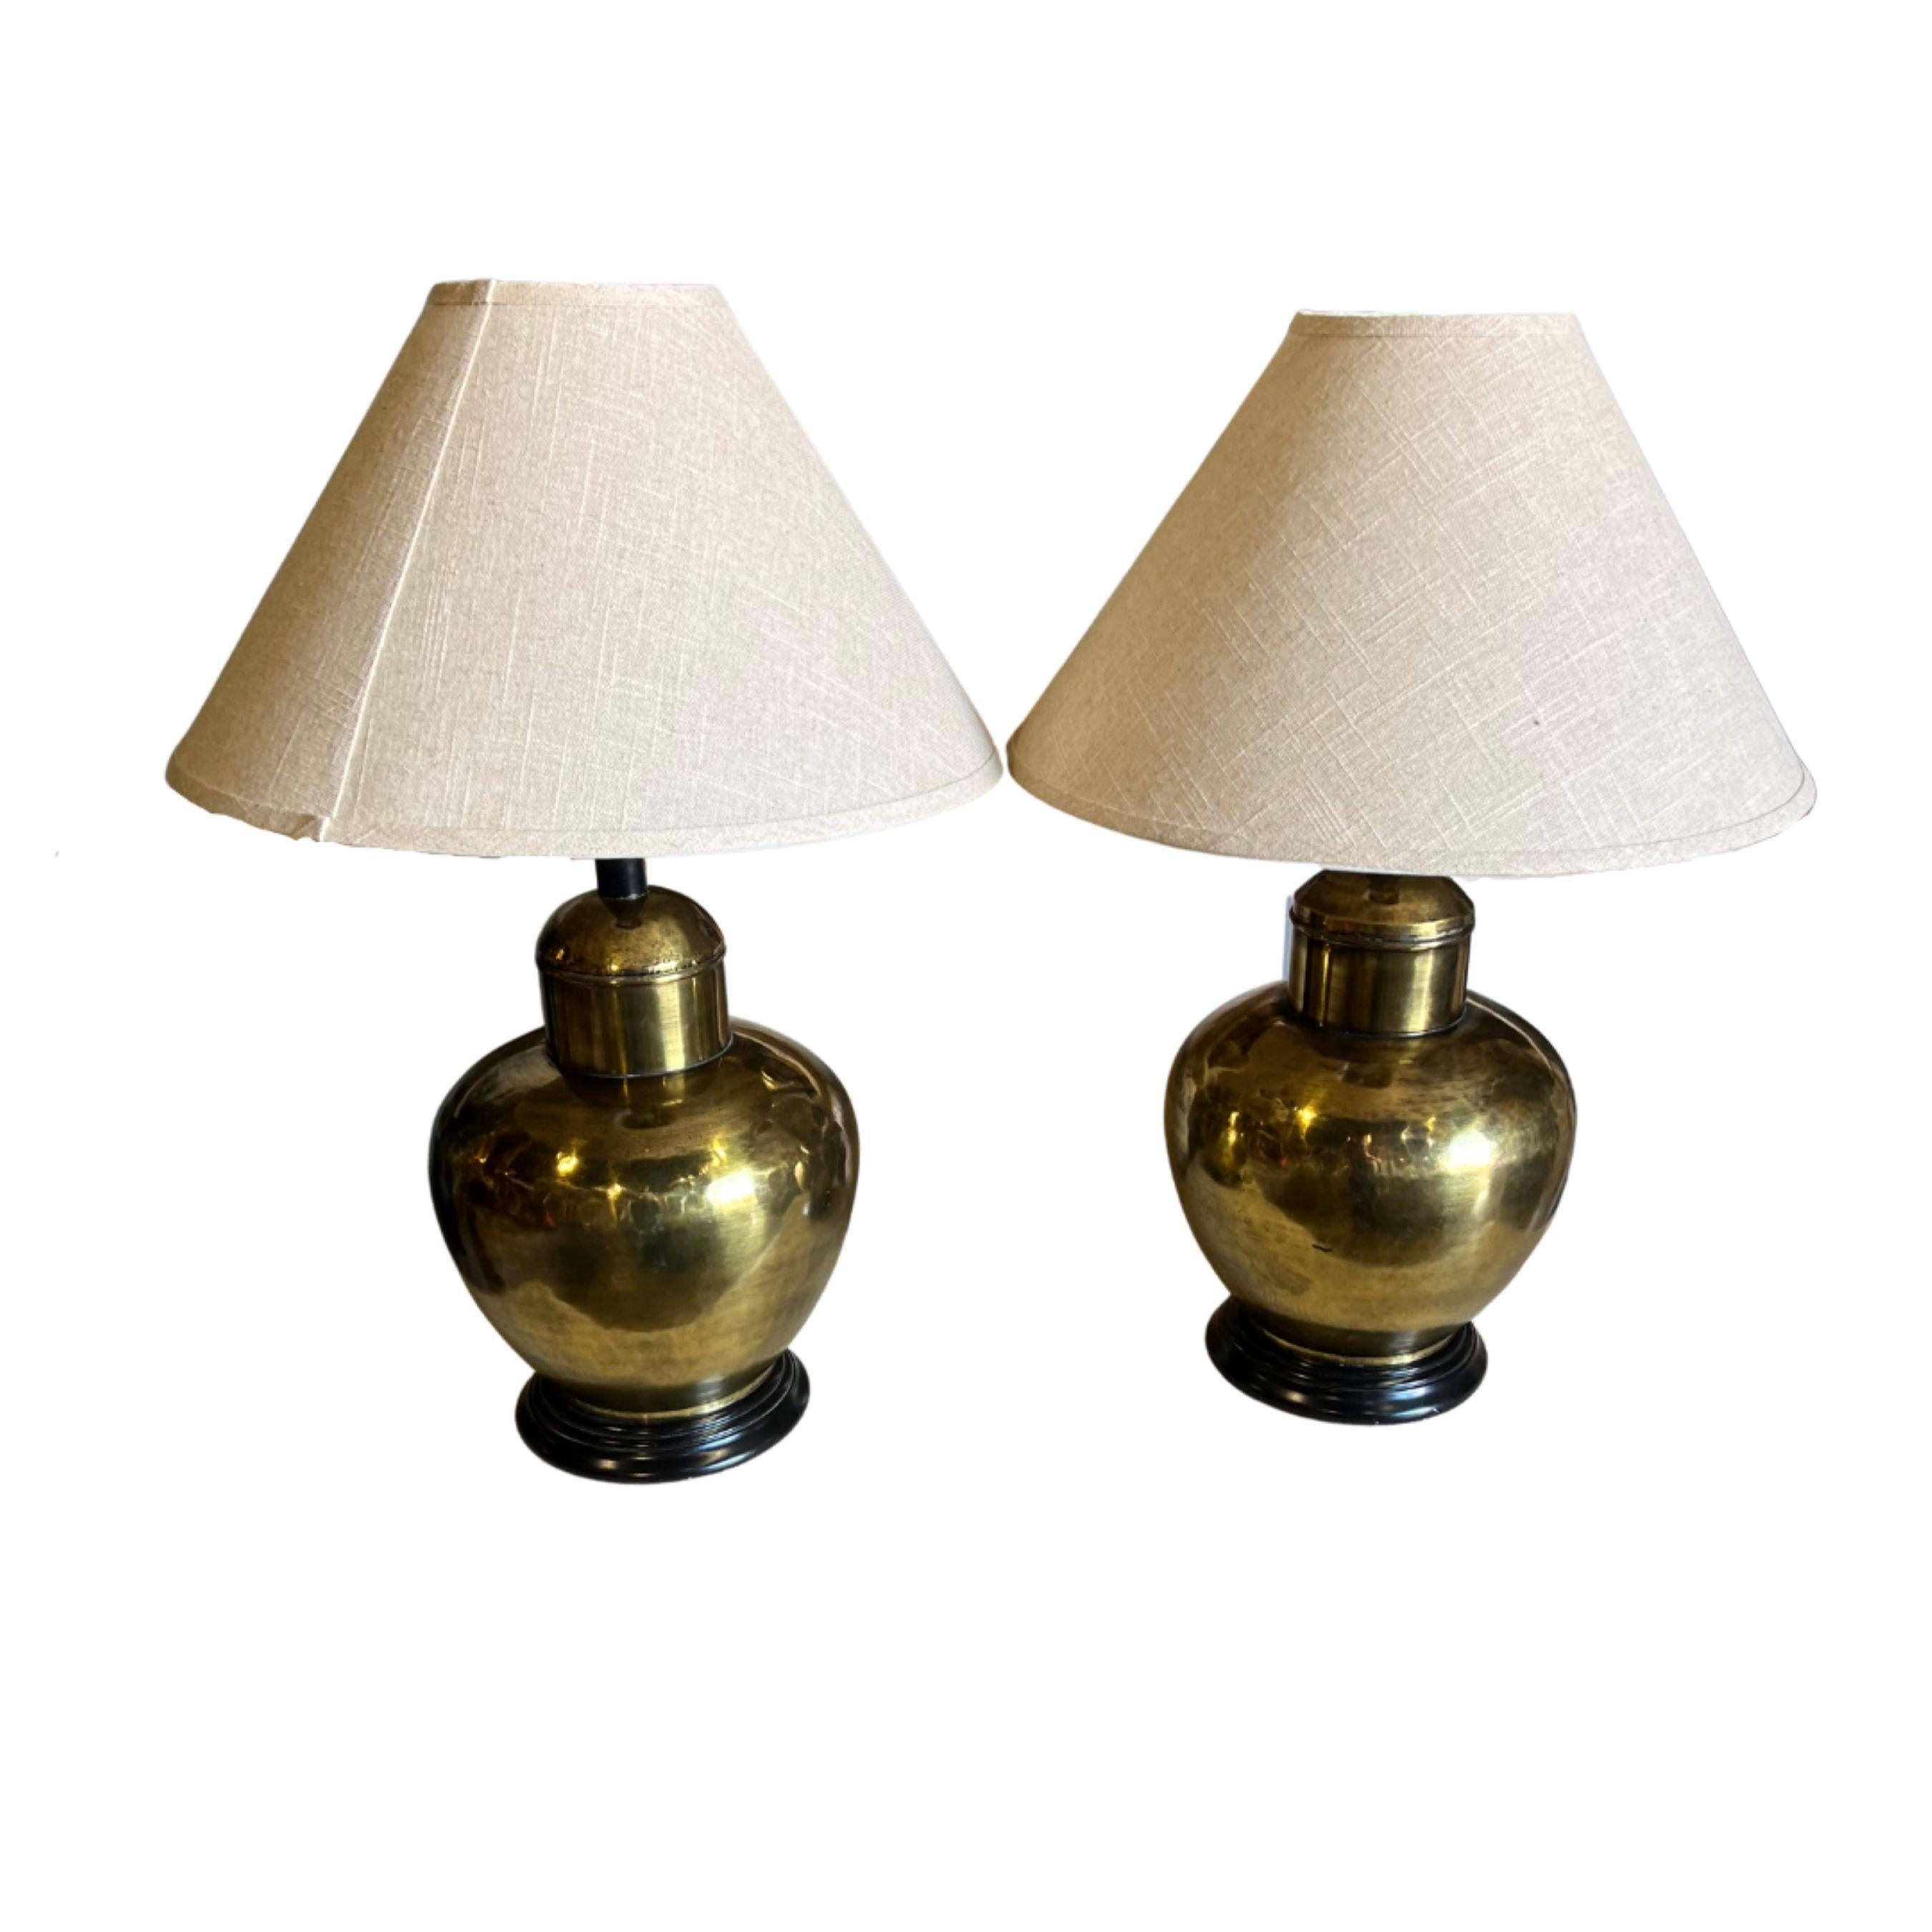 Vintage
1960's
Pair of brass lamps with black base.
Brand new fine burlap lamp shades
In overall good working condition with no dents or noticeable marks or nicks
Wear is consistent with age and use.

Lamp Overall 
 Height: 27